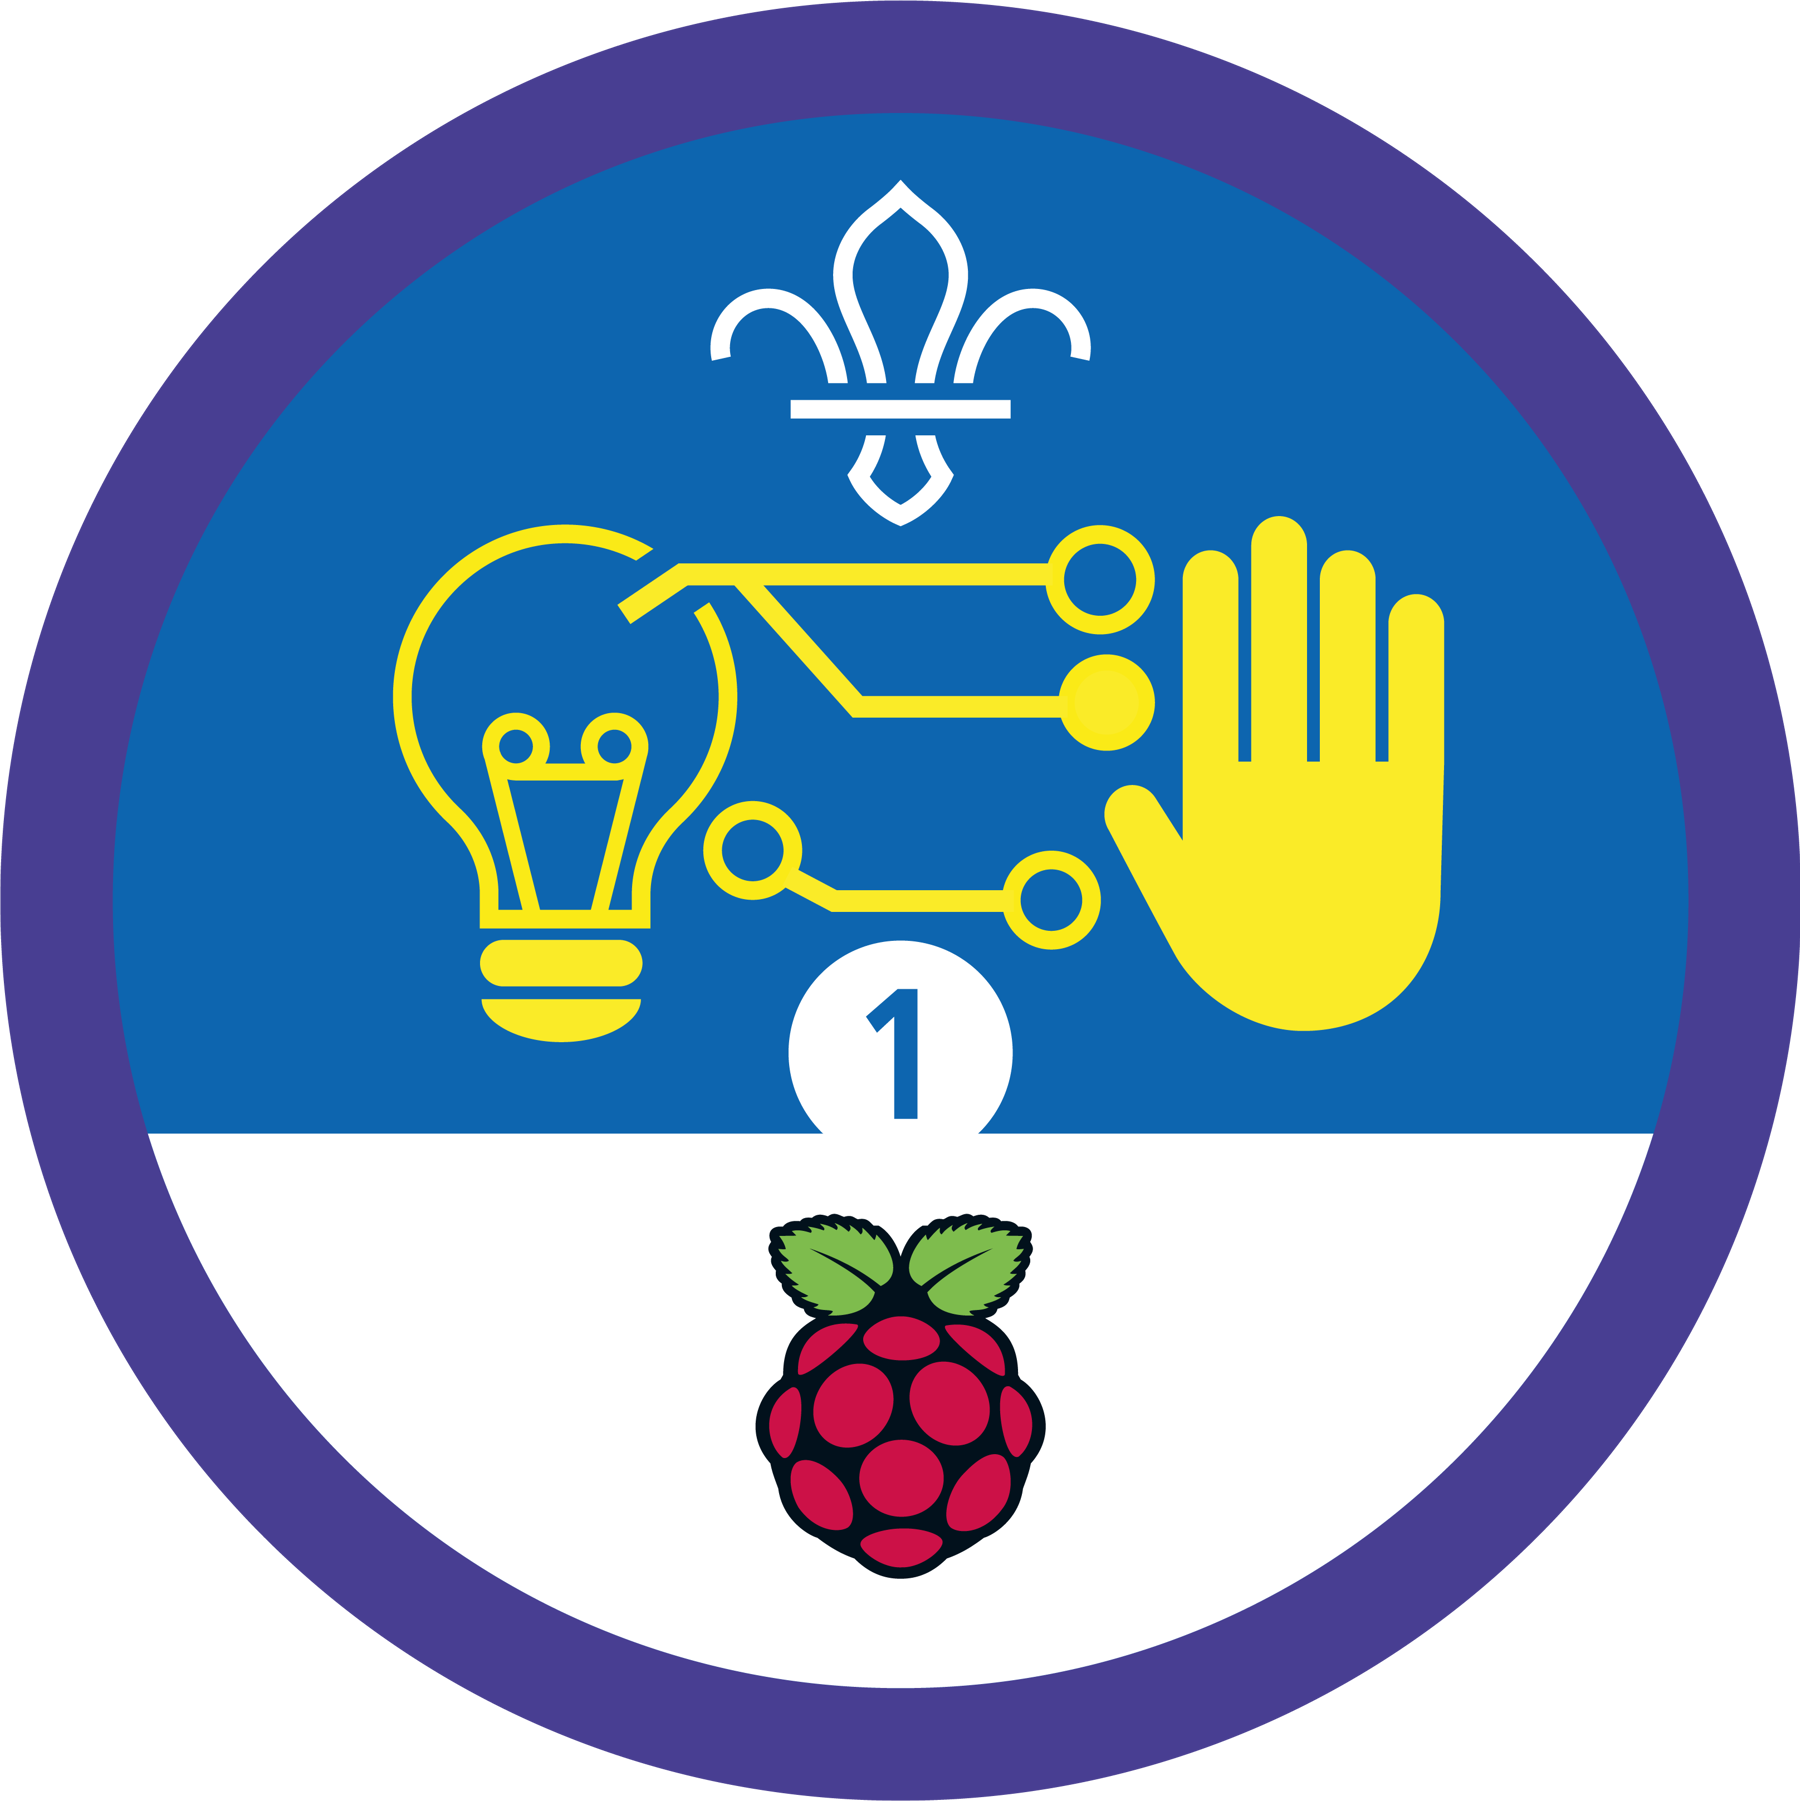 A round Scouts badge with a lightbulb and hand with wires going between them, and the Raspberry Pi logo at the bottom